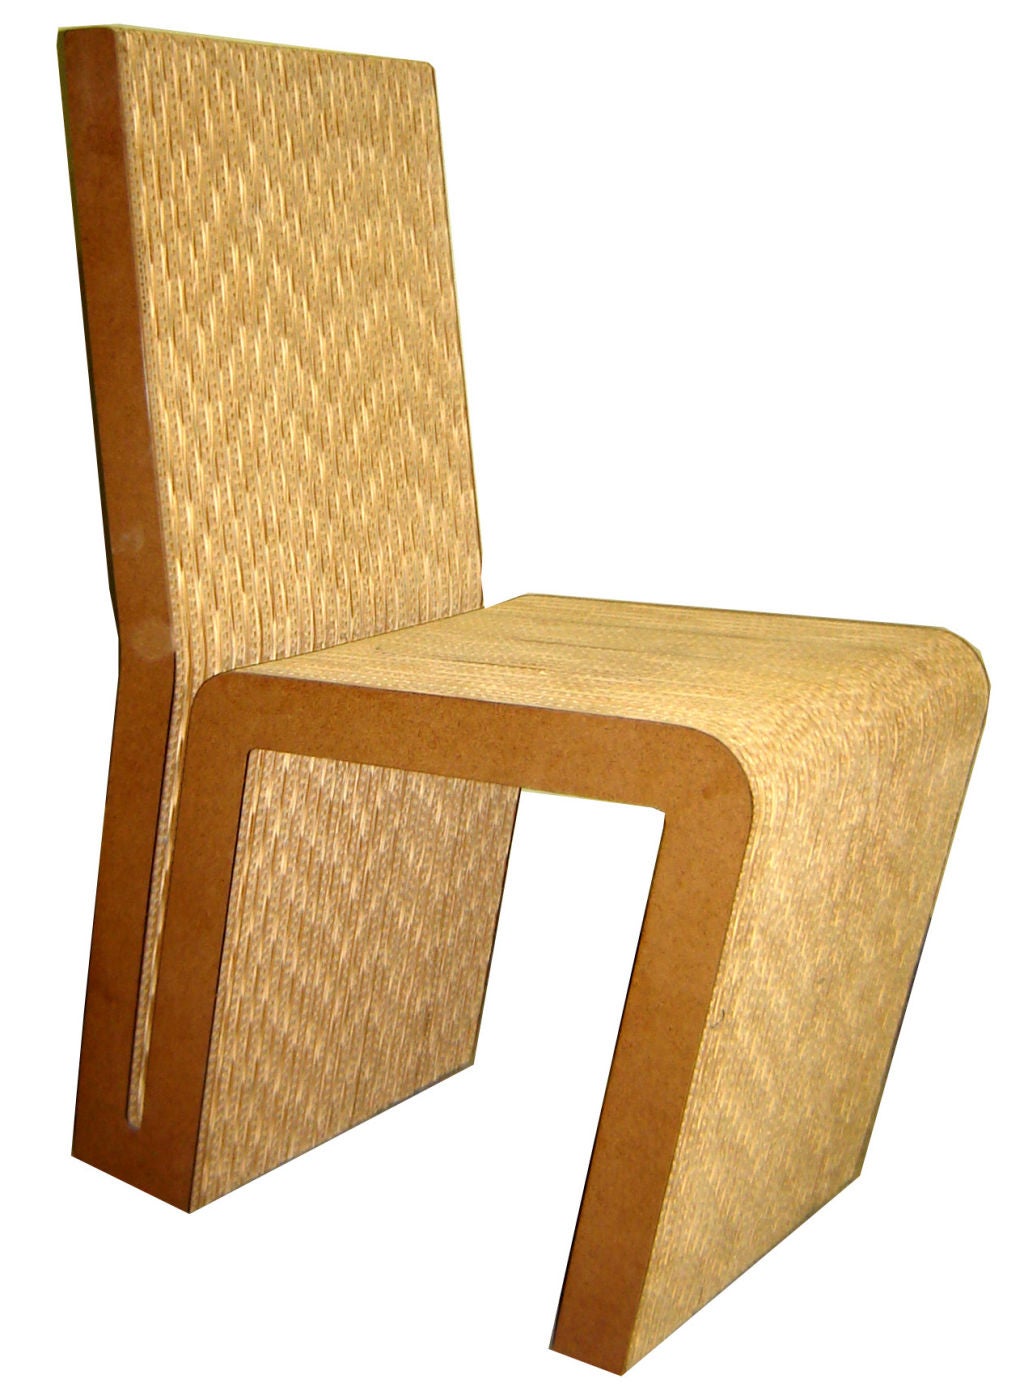 A pair of Frank Gehry (1929-    ) corrugated cardboard side chairs from his “Easy Edges” group of 1969-73, these are from ca. 1972. The remarkably strong and comfortable chairs are pictures in “Frank Gehry Buildings and Projects” p. 64 which was